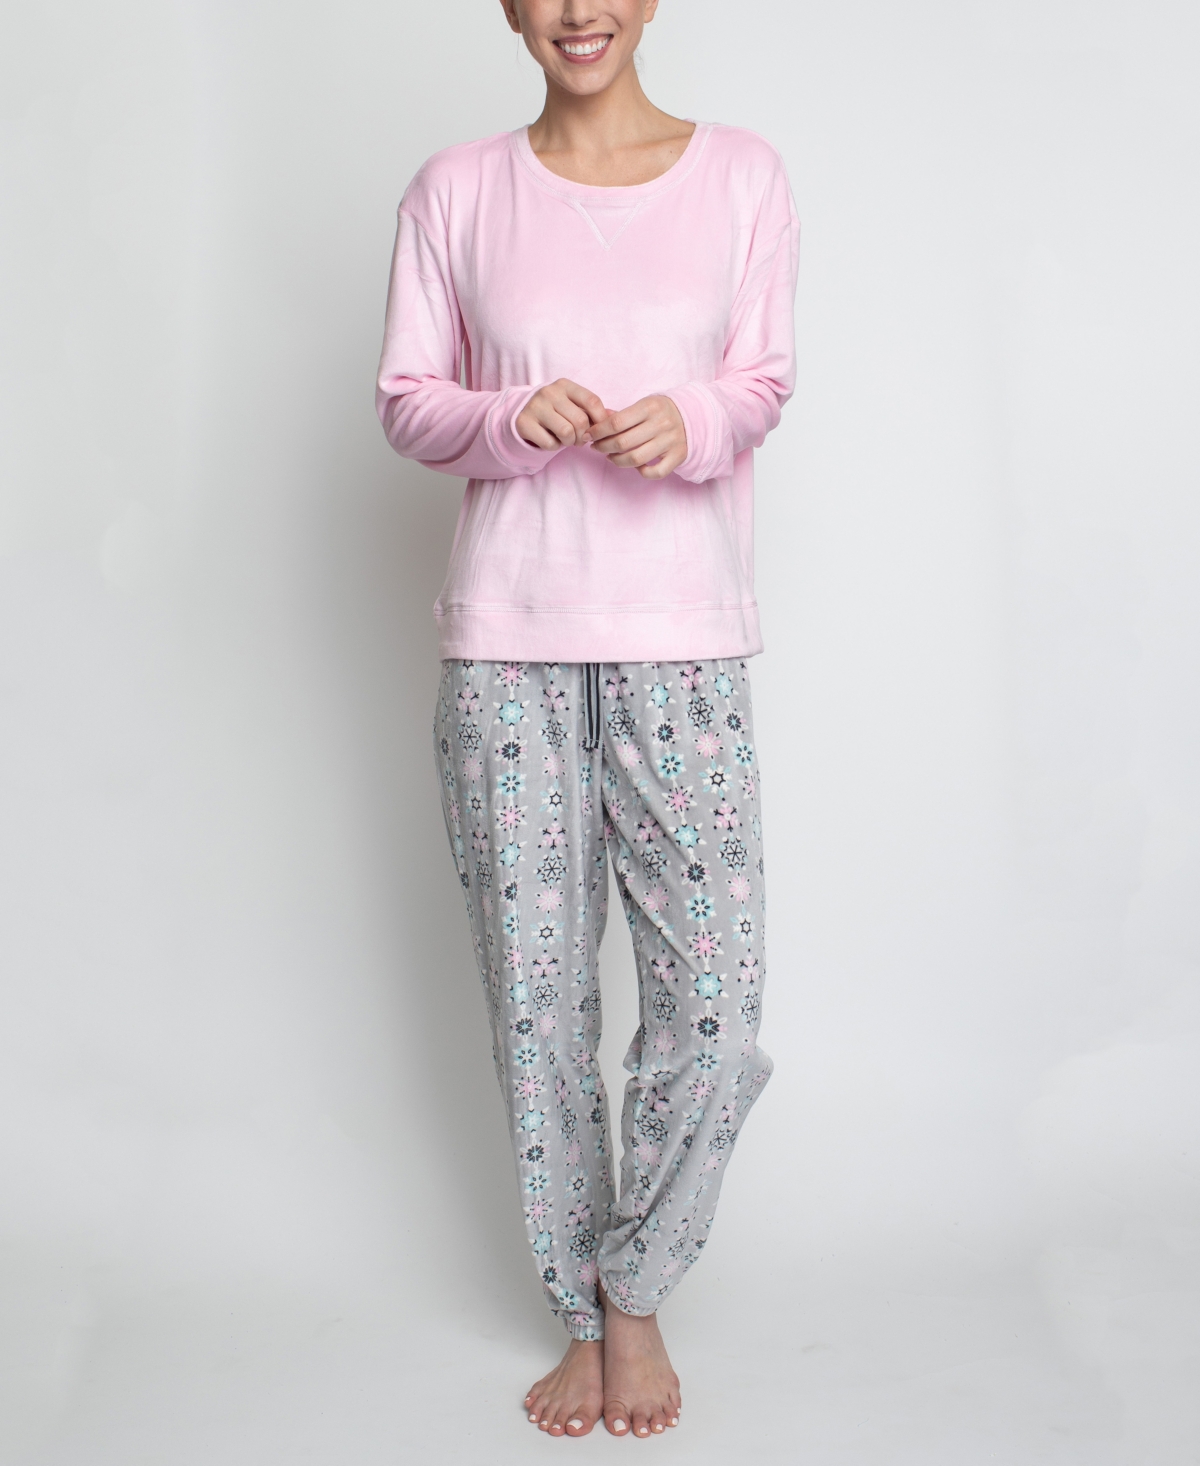 Goodnight Kiss Women's Silky Velour Long Sleeve Top And Jog Style Pant Pajama Set, 2 Piece In Pink